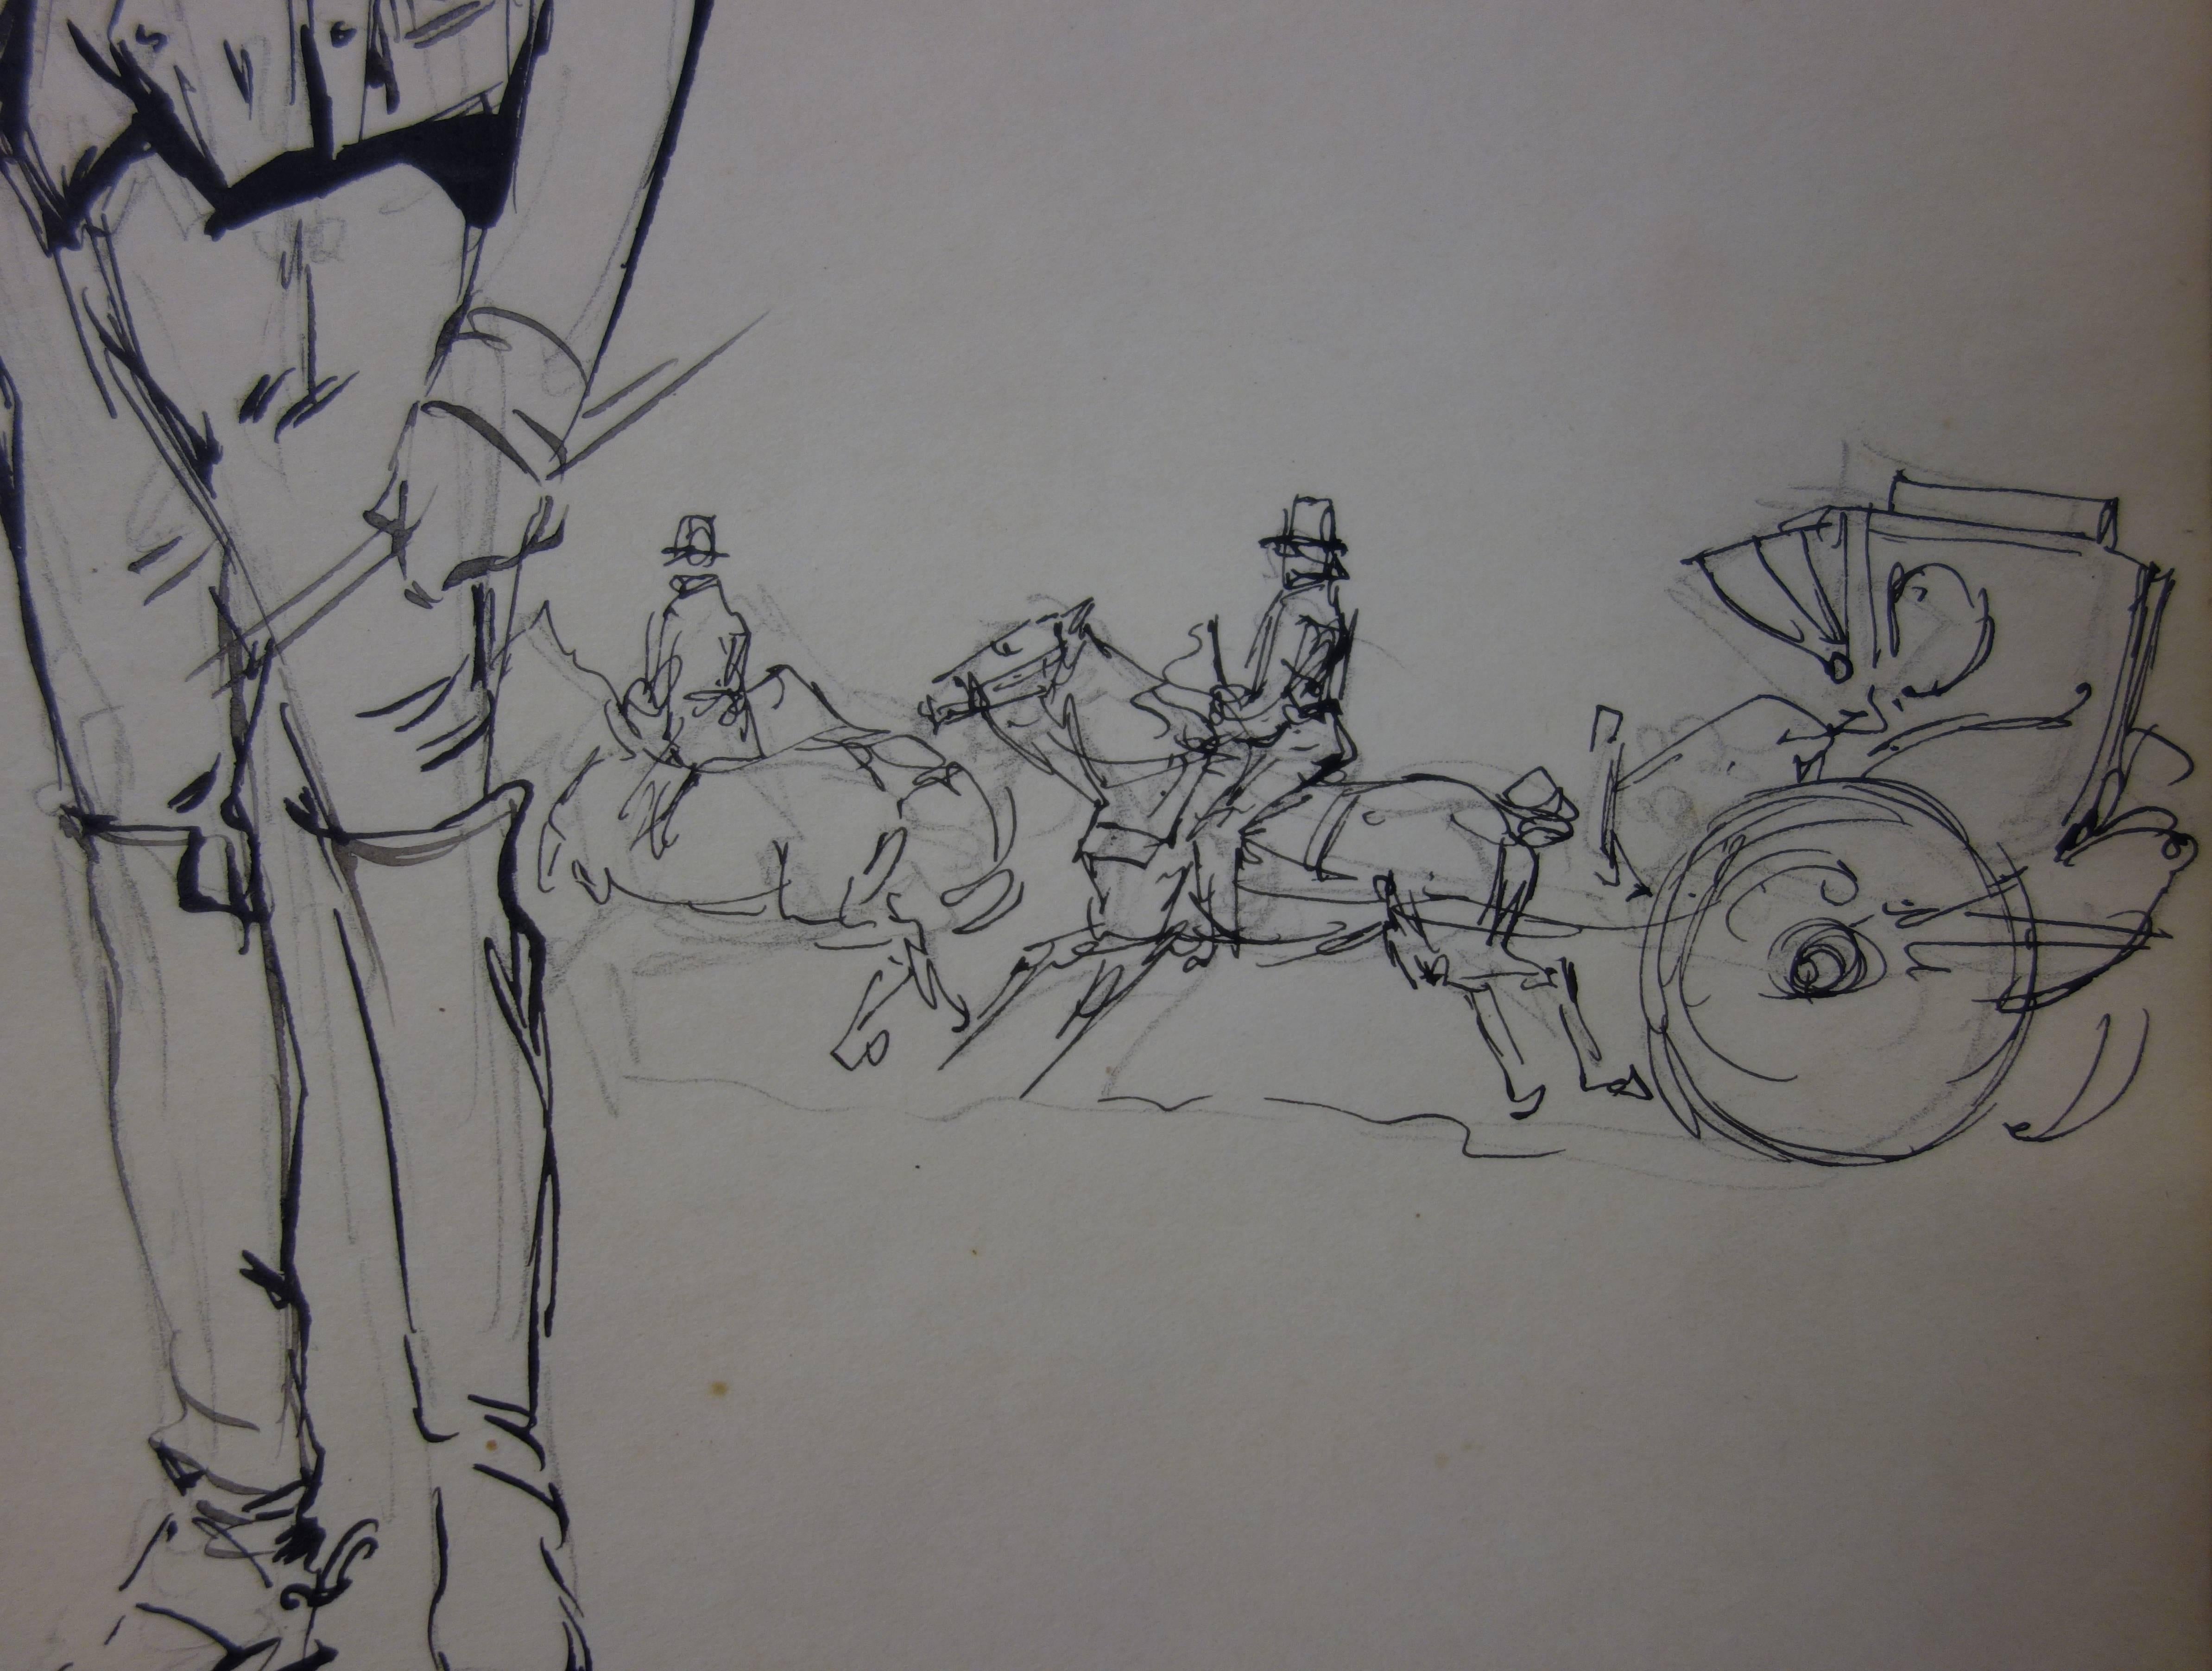 Nineteenth-century Coachman - Ink drawing - 1916 - Academic Art by Georges Conrad